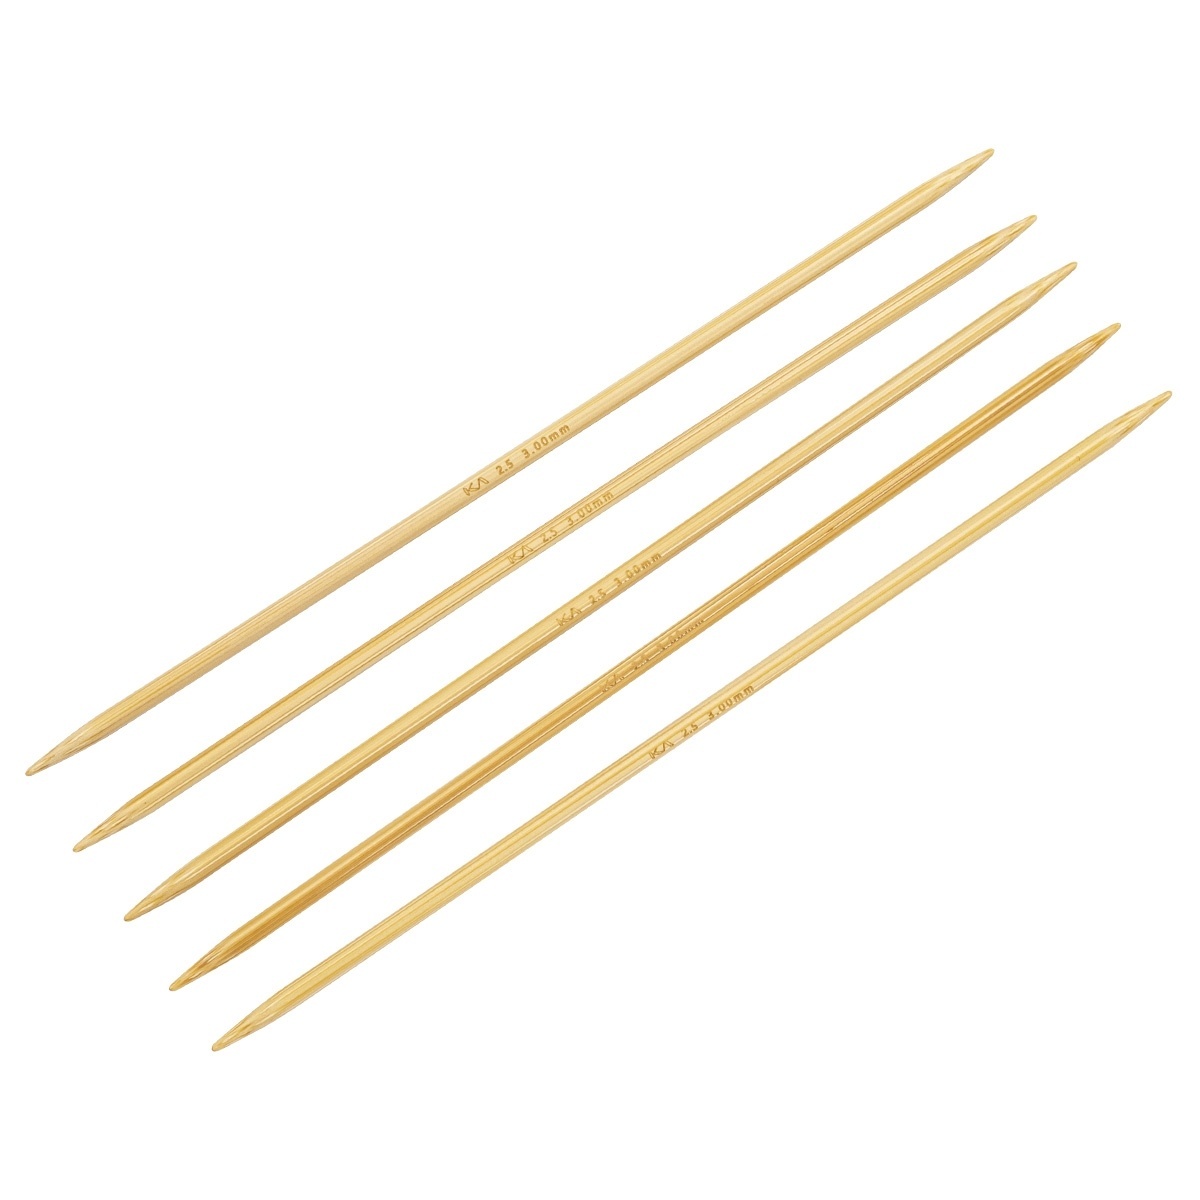 Double-pointed knitting needles, Seeknit, 3.0mm фото 2